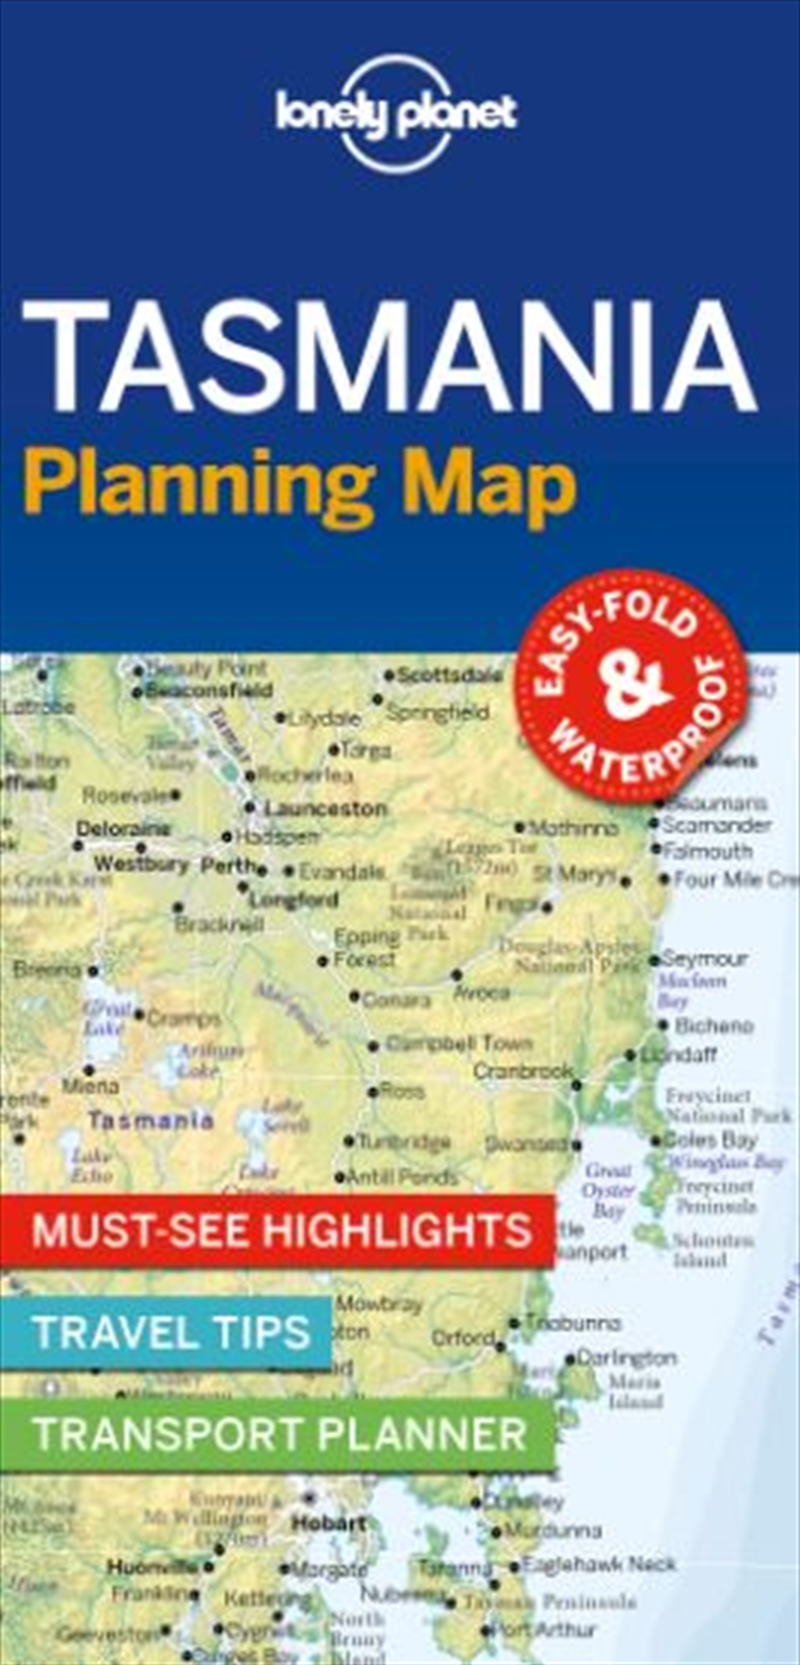 Lonely Planet Tasmania Planning Map/Product Detail/Travel & Holidays